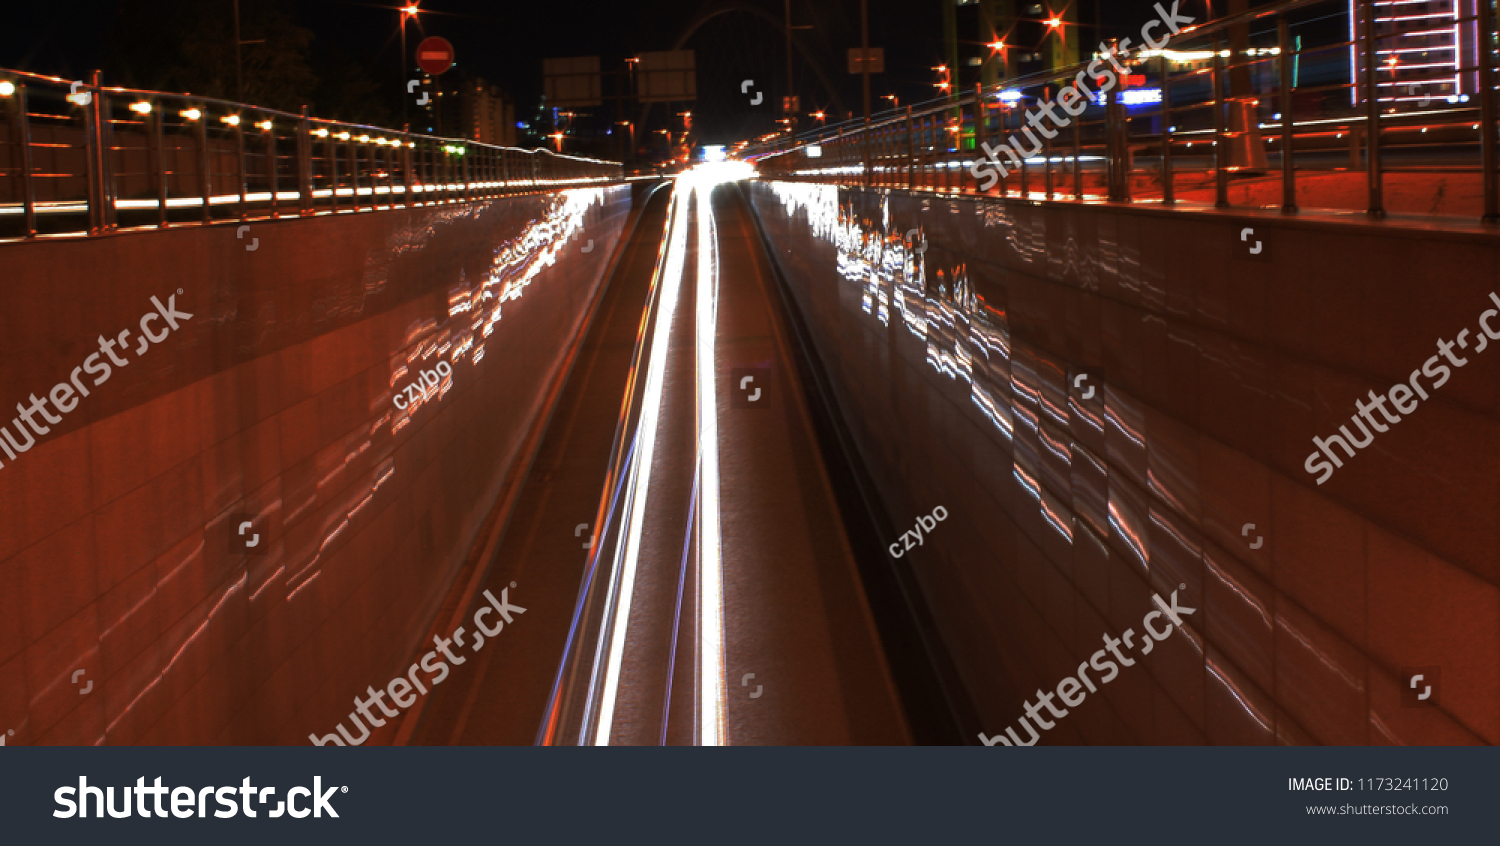 the line of headlights , the line of headlights on the road , still photography, shutter speed
 #1173241120